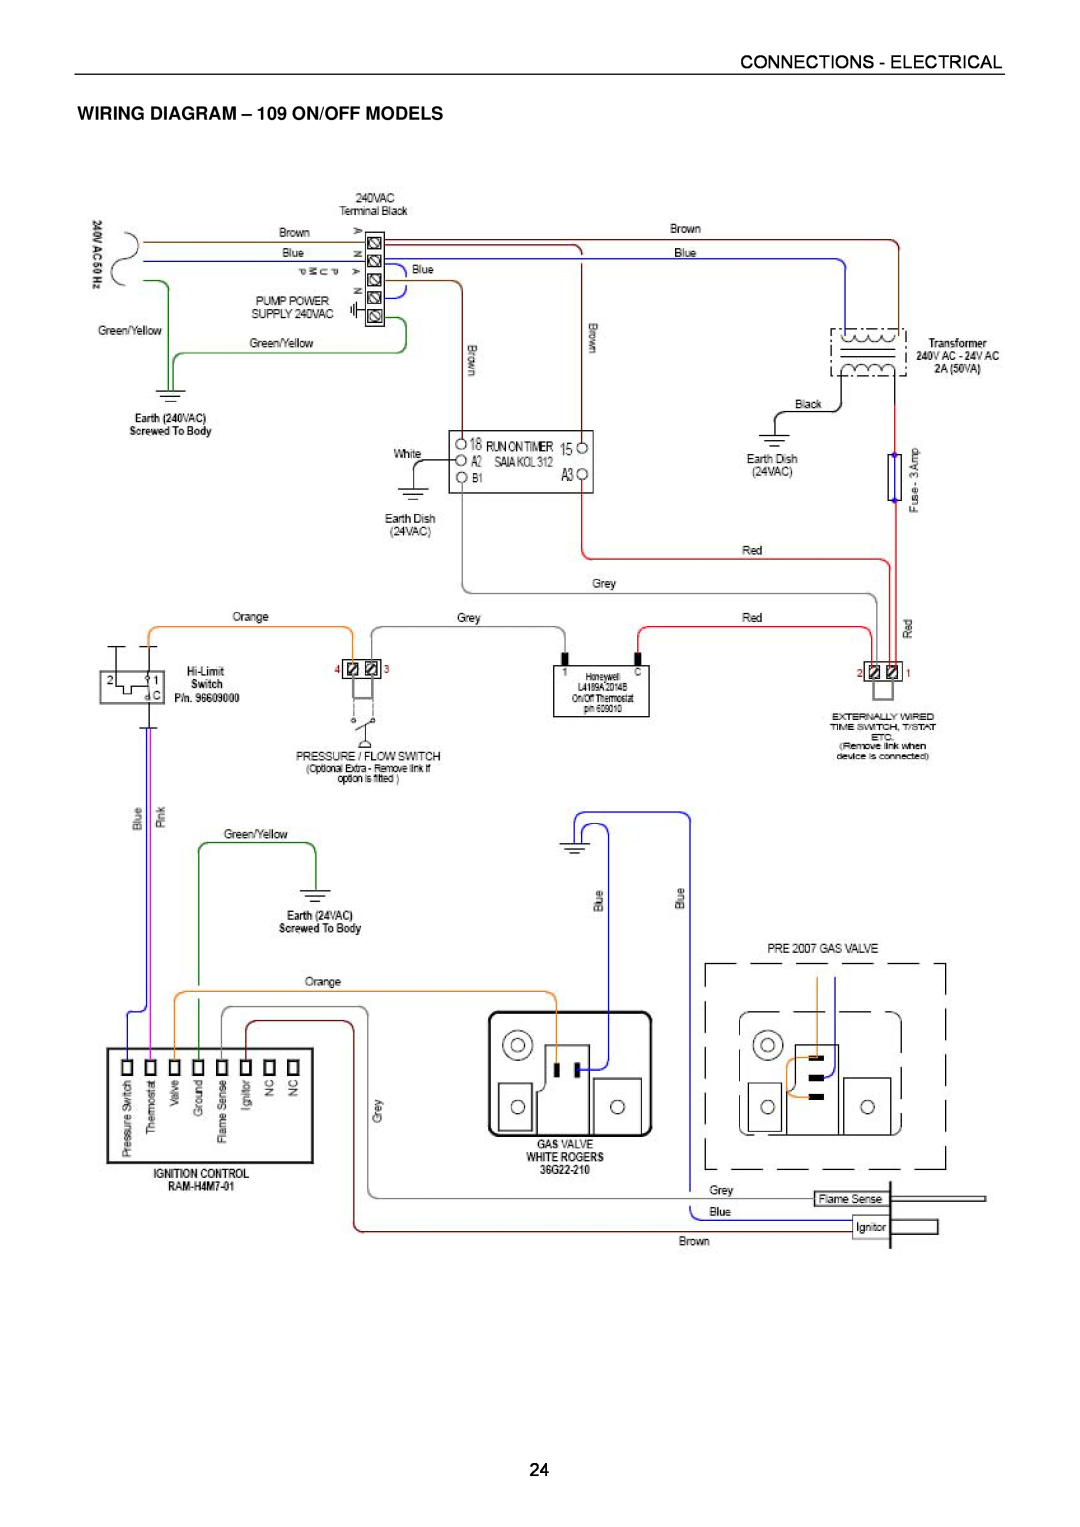 Raypak B0147, B0109 installation instructions WIRING DIAGRAM - 109 ON/OFF MODELS, Connections - Electrical 